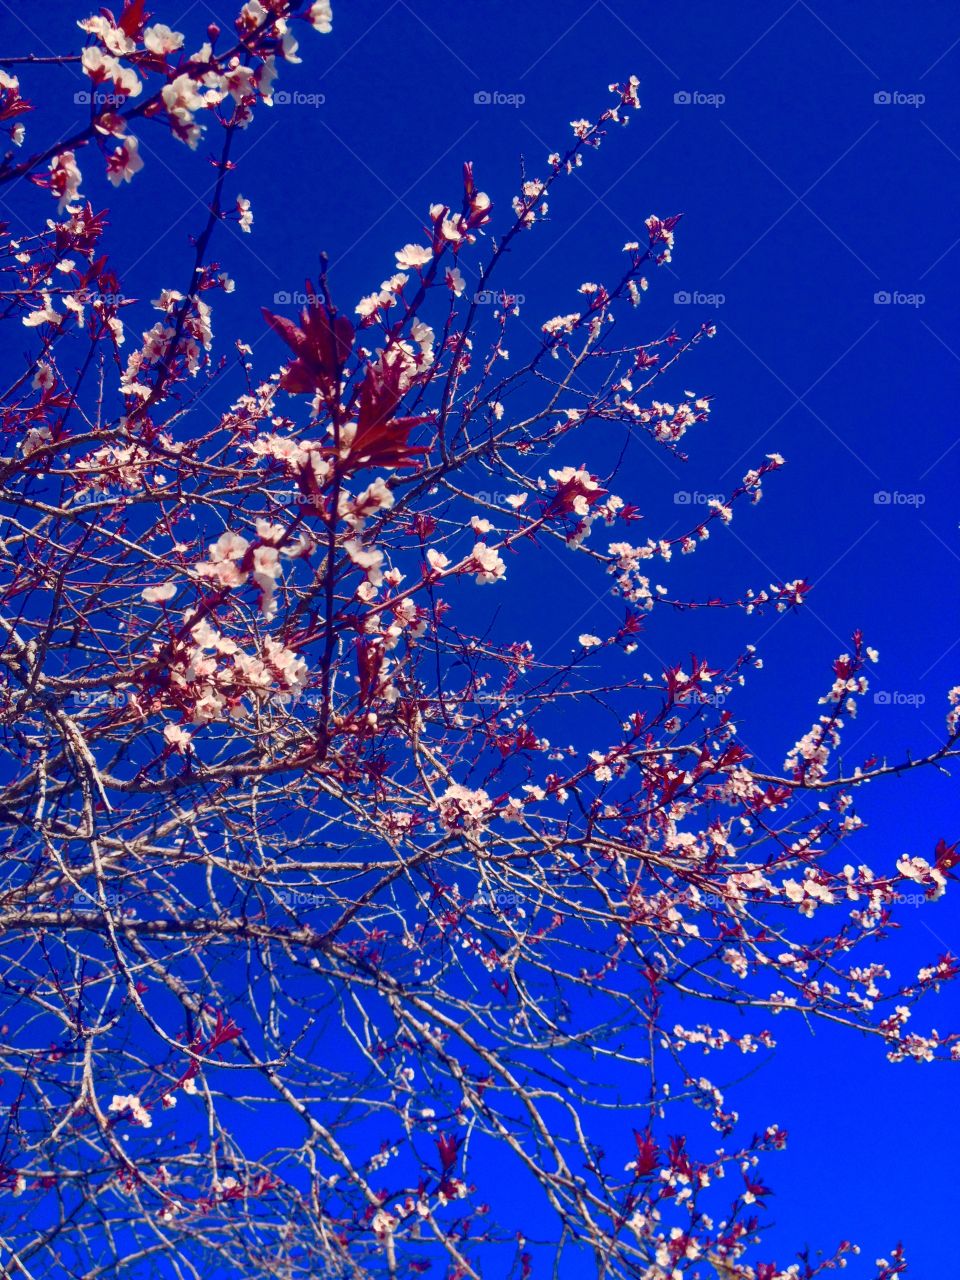 Cherry tree blossoms. Blossoming cherry tree